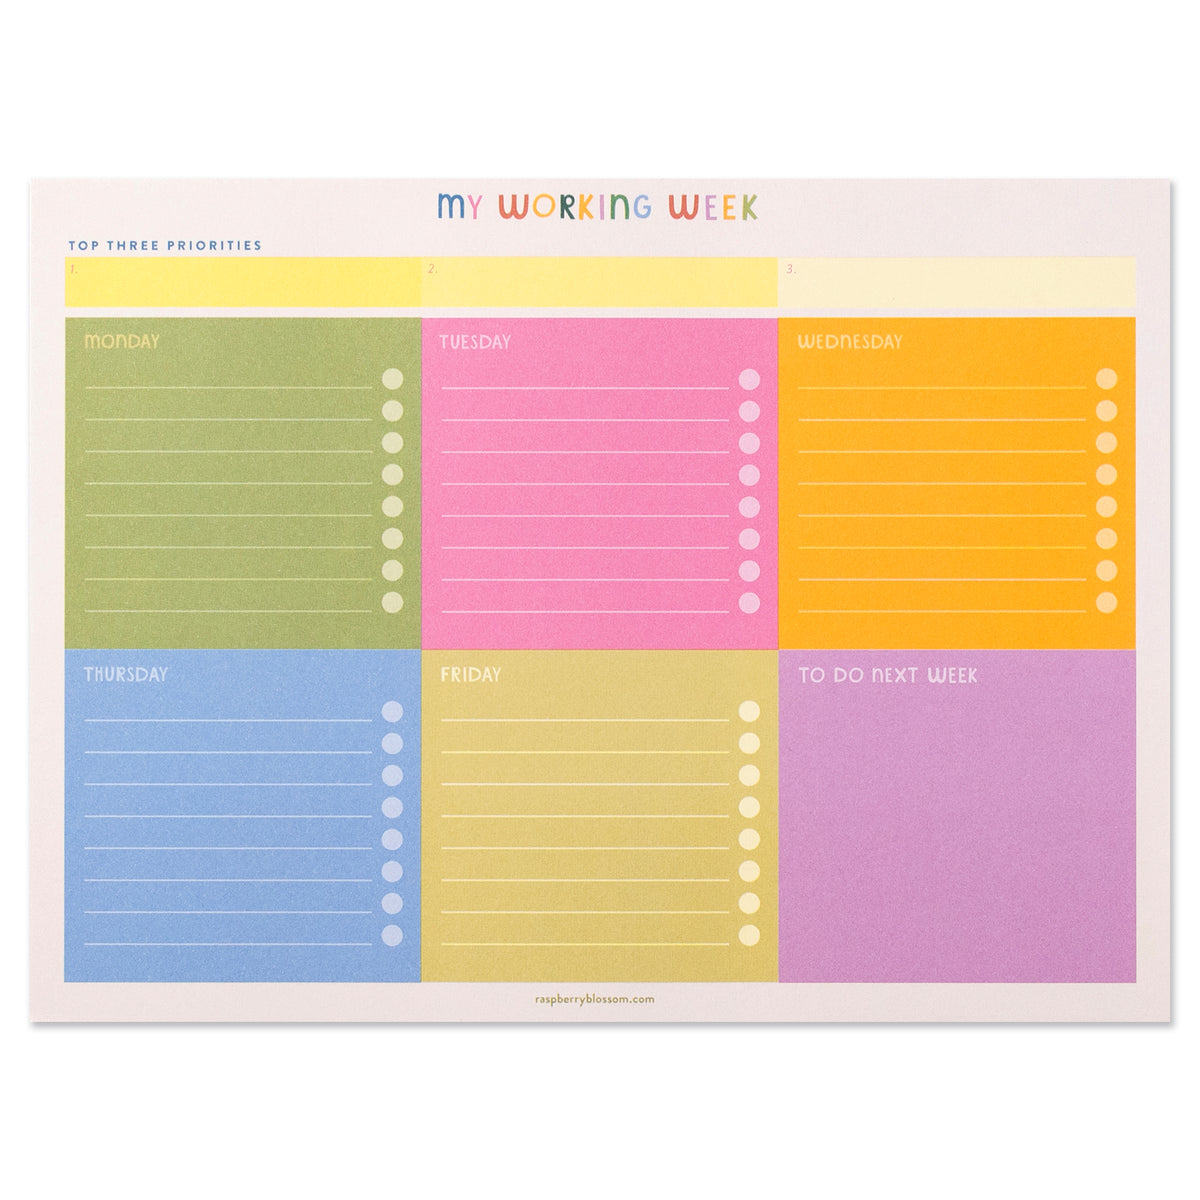 A rectangular colourful notepad with the title in colourful block capitals My Working Week at the top. The notepad is broken down into days of the working week i.e. monday to friday. Each box has lines to write a task on with circles to check off the task at the end of each. There is also space to write your top three priorities for the week and to do next week.